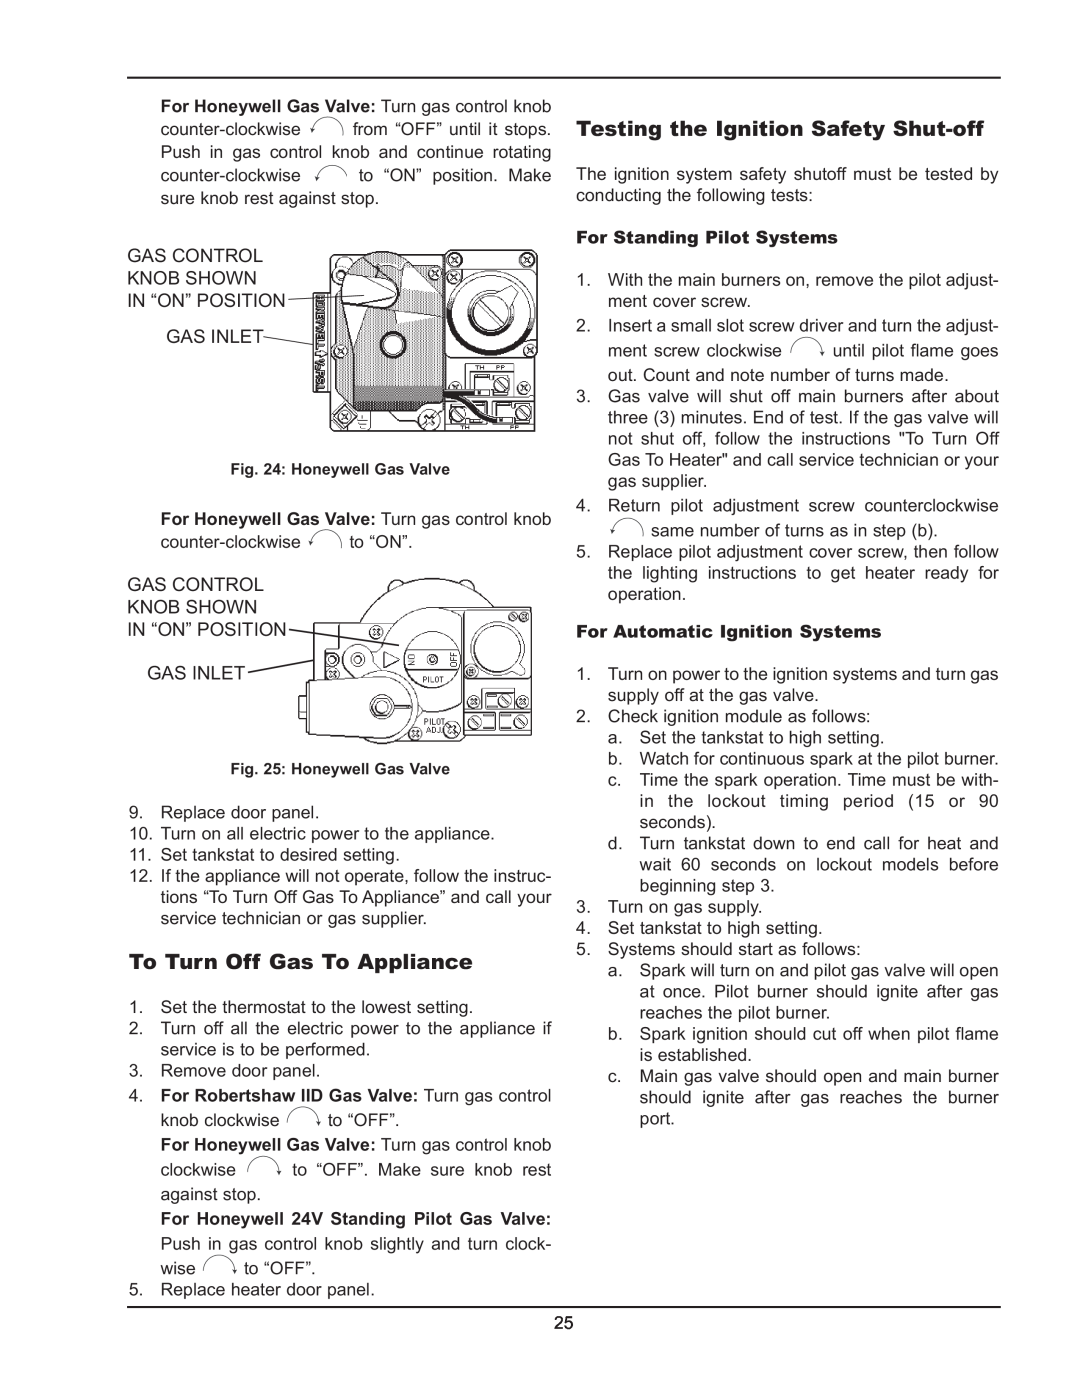 Raypak 2600401 To Turn Off Gas To Appliance, Testing the Ignition Safety Shut-off, For Standing Pilot Systems 